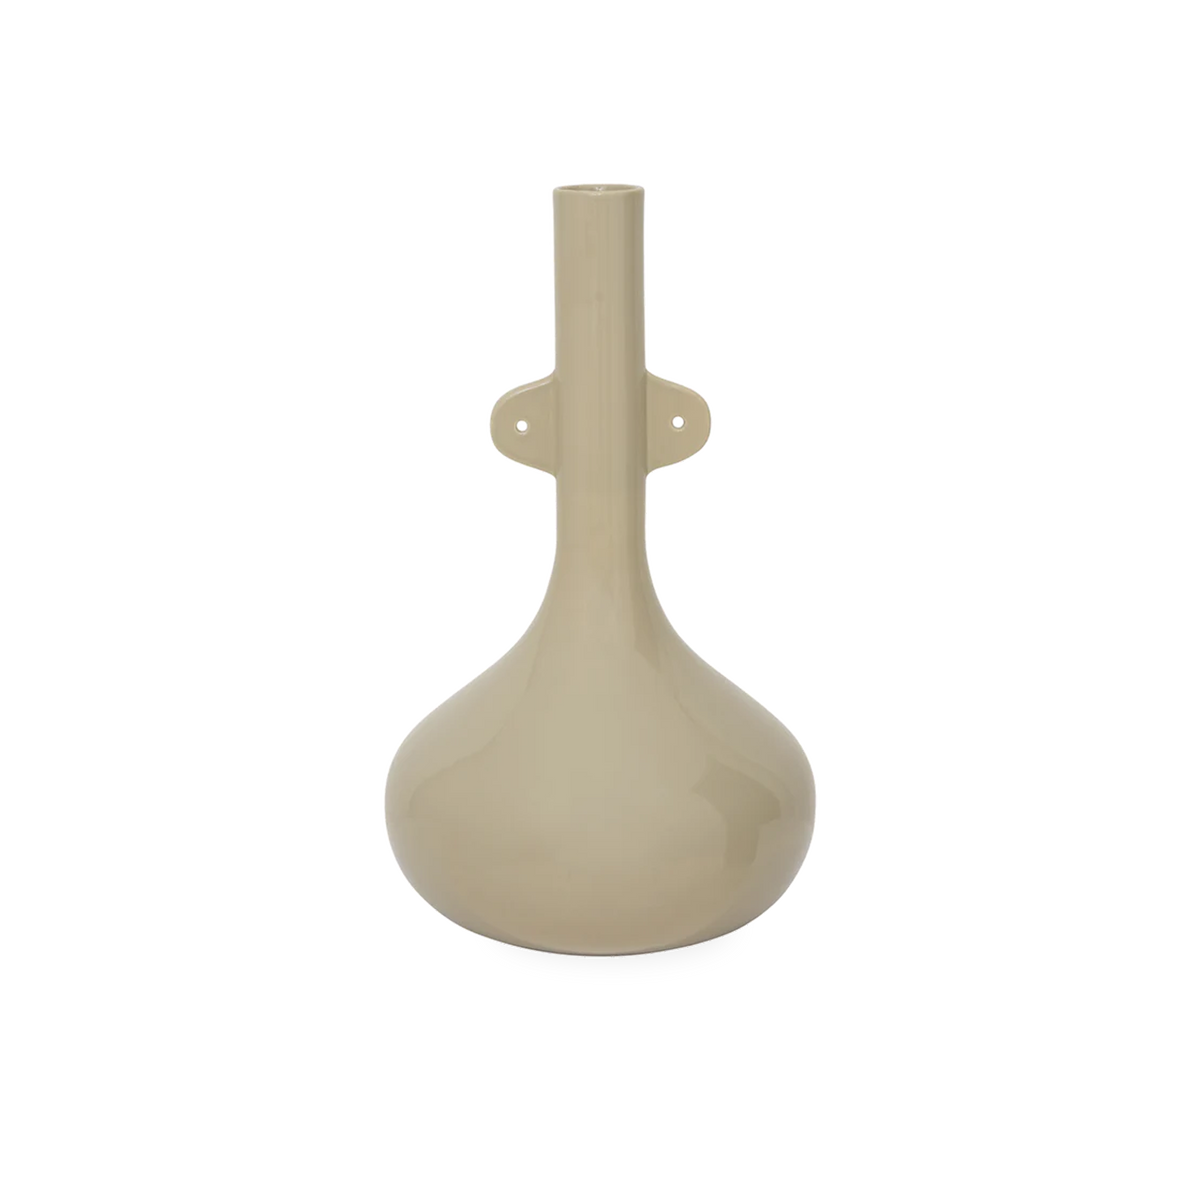 Curvy, playful and full of character, the Figure Ceramic Vase features a bulbous base that tapers off to an elegant, slender neck.